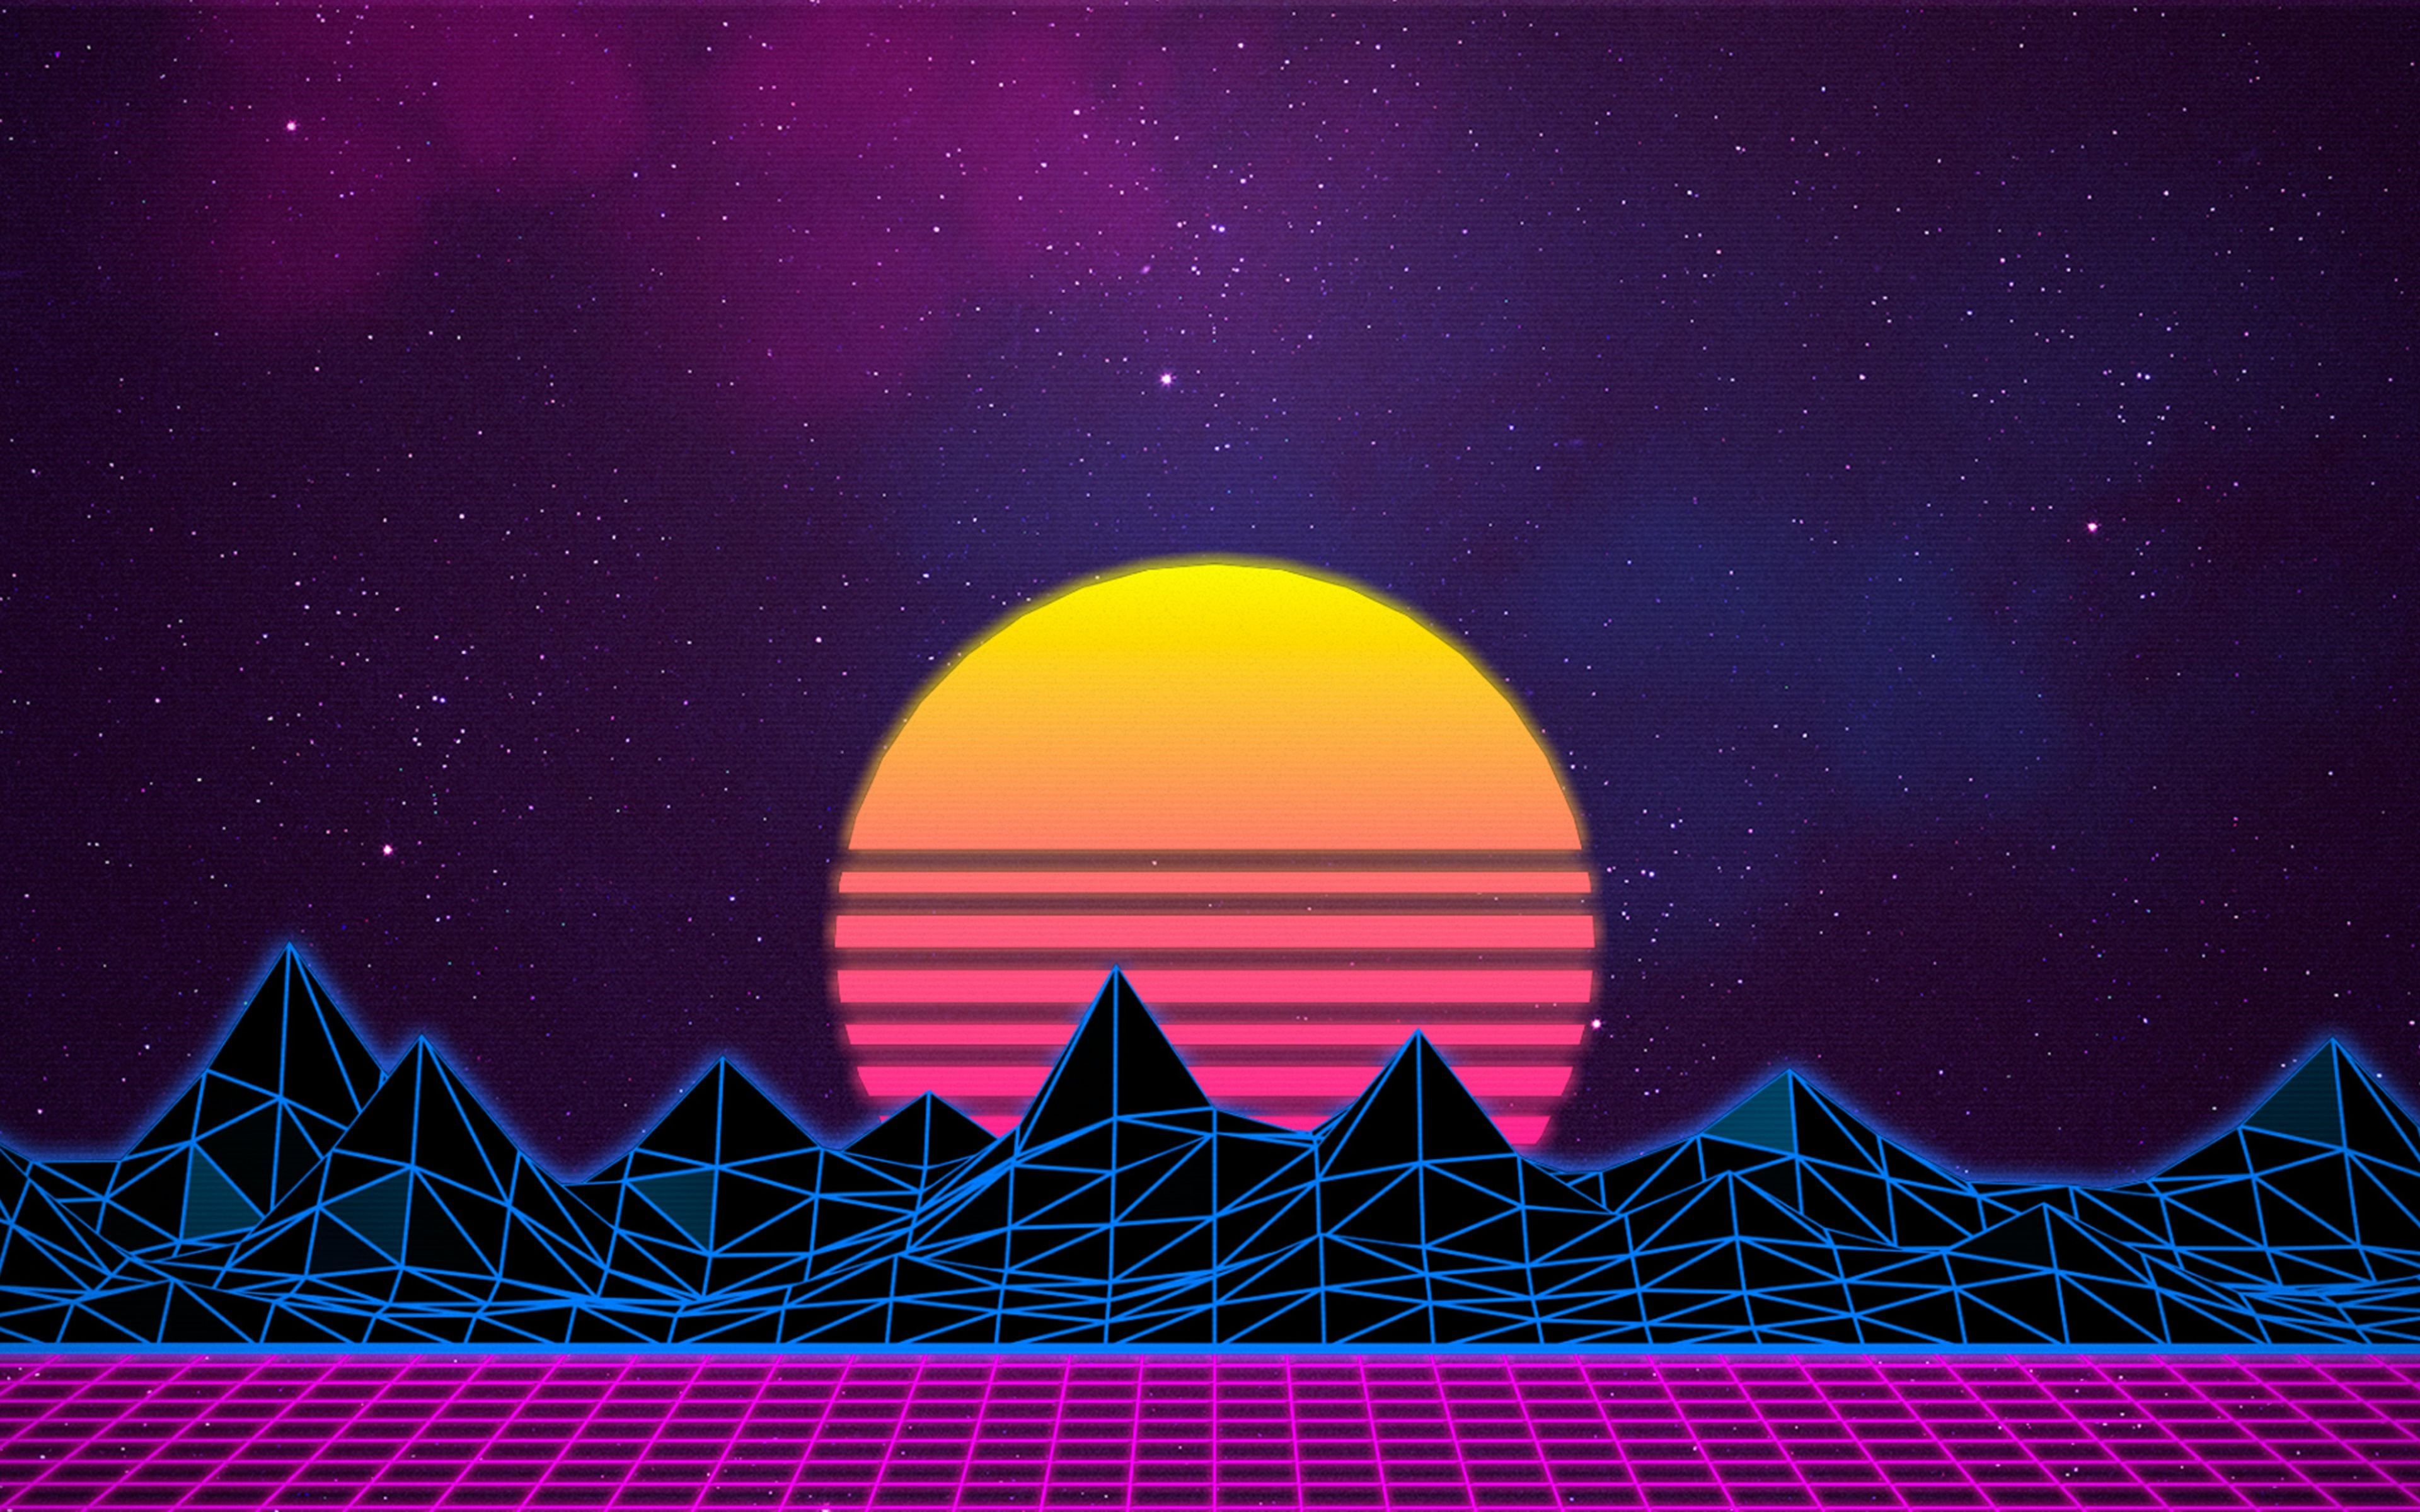 Synthwave sunset wallpaper with mountains and a grid - 80s, gaming